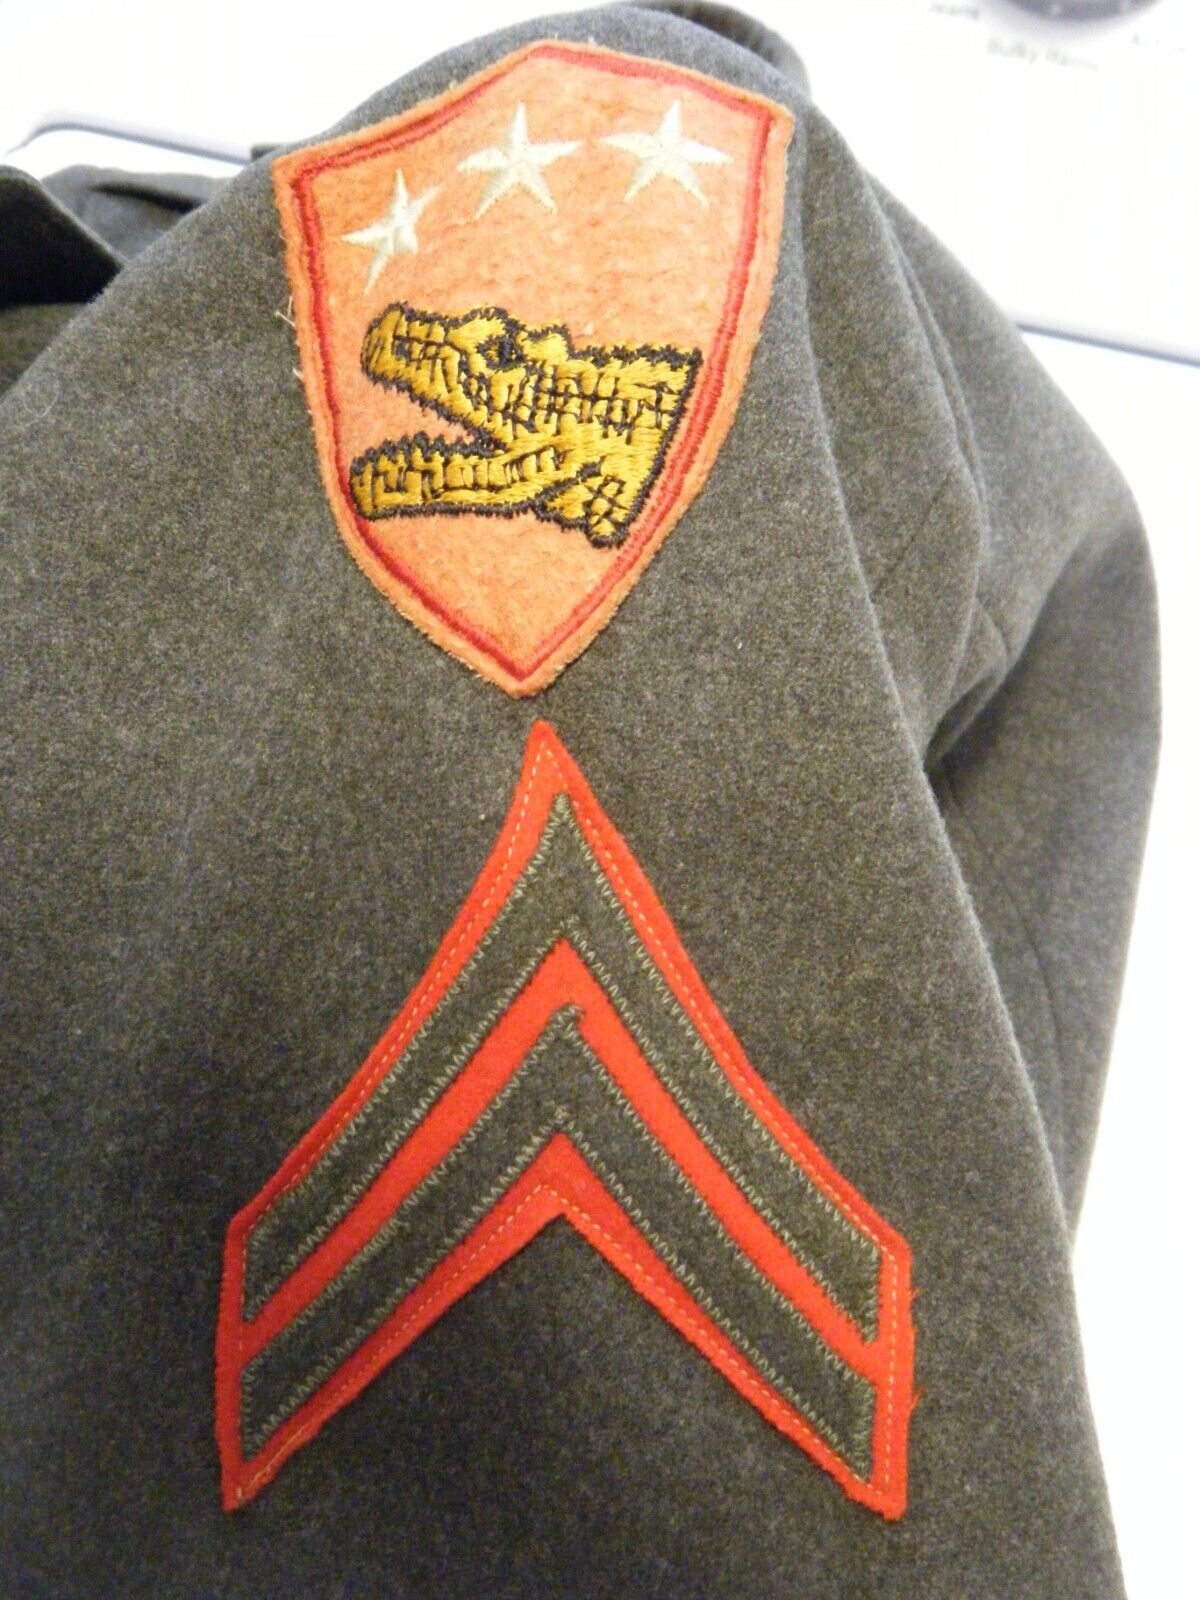 USMC UNIFORM COAT AND COVER WITH EAGLE GLOBE AND ANCHOR DEVICES